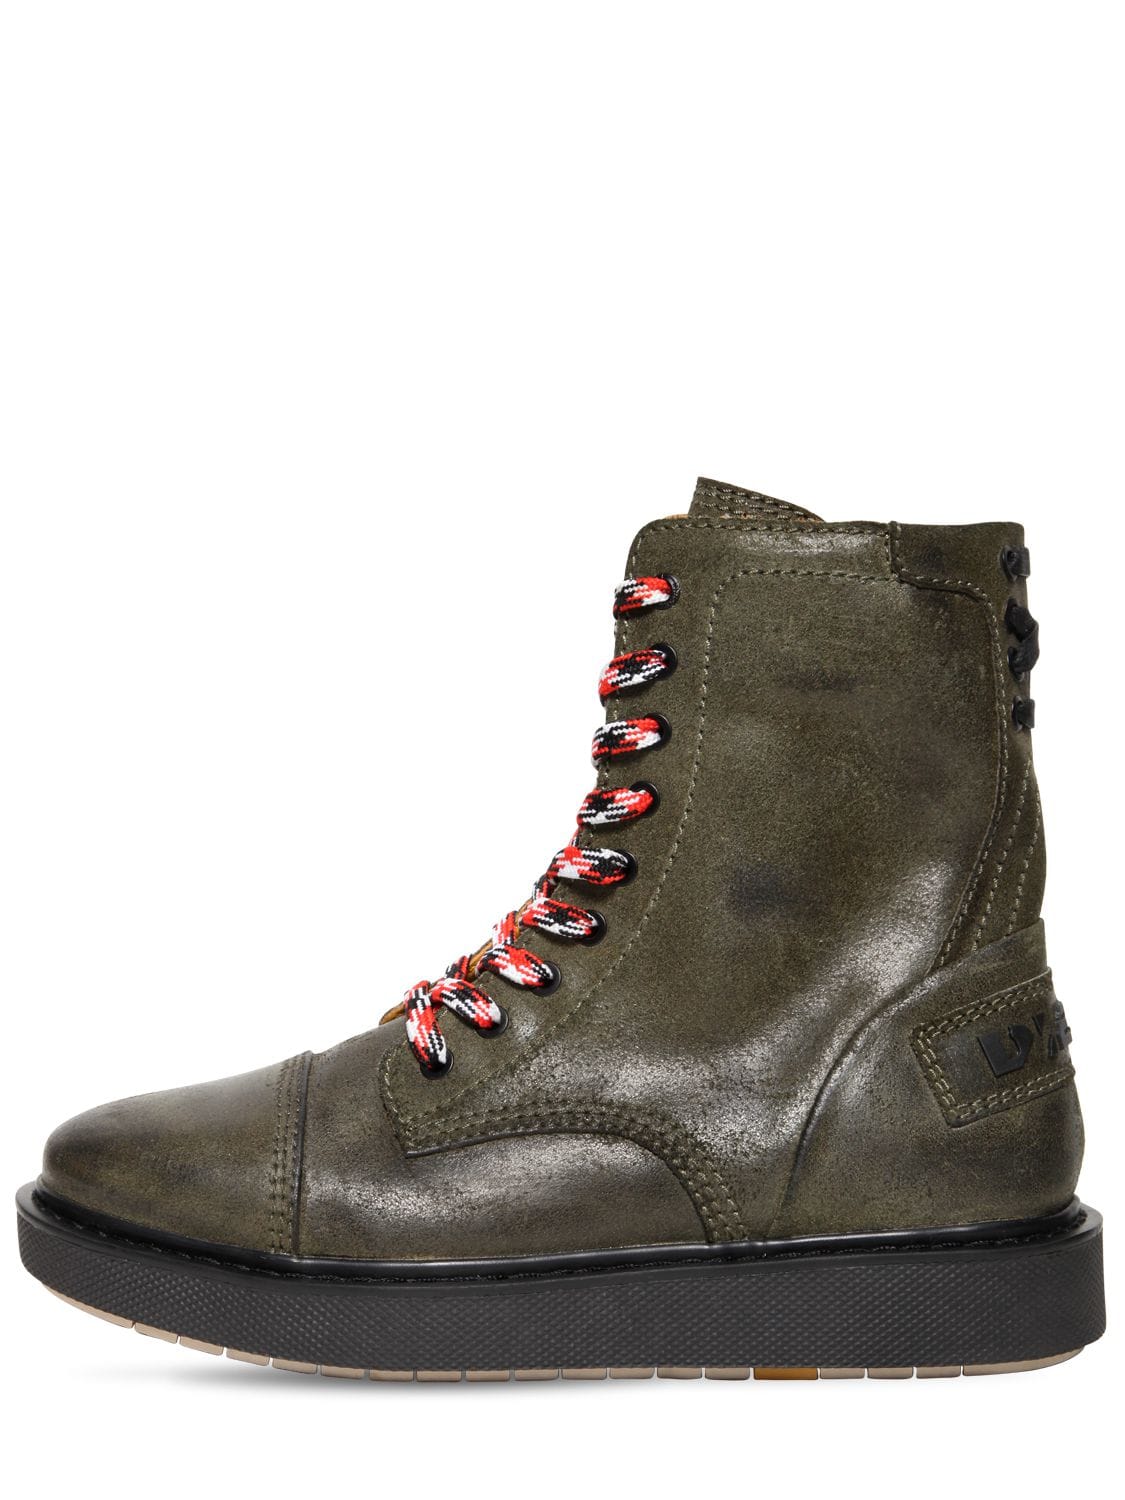 Green Boots Logo - Diesel Reworked Logo Vintage Leather Boots In Green | ModeSens